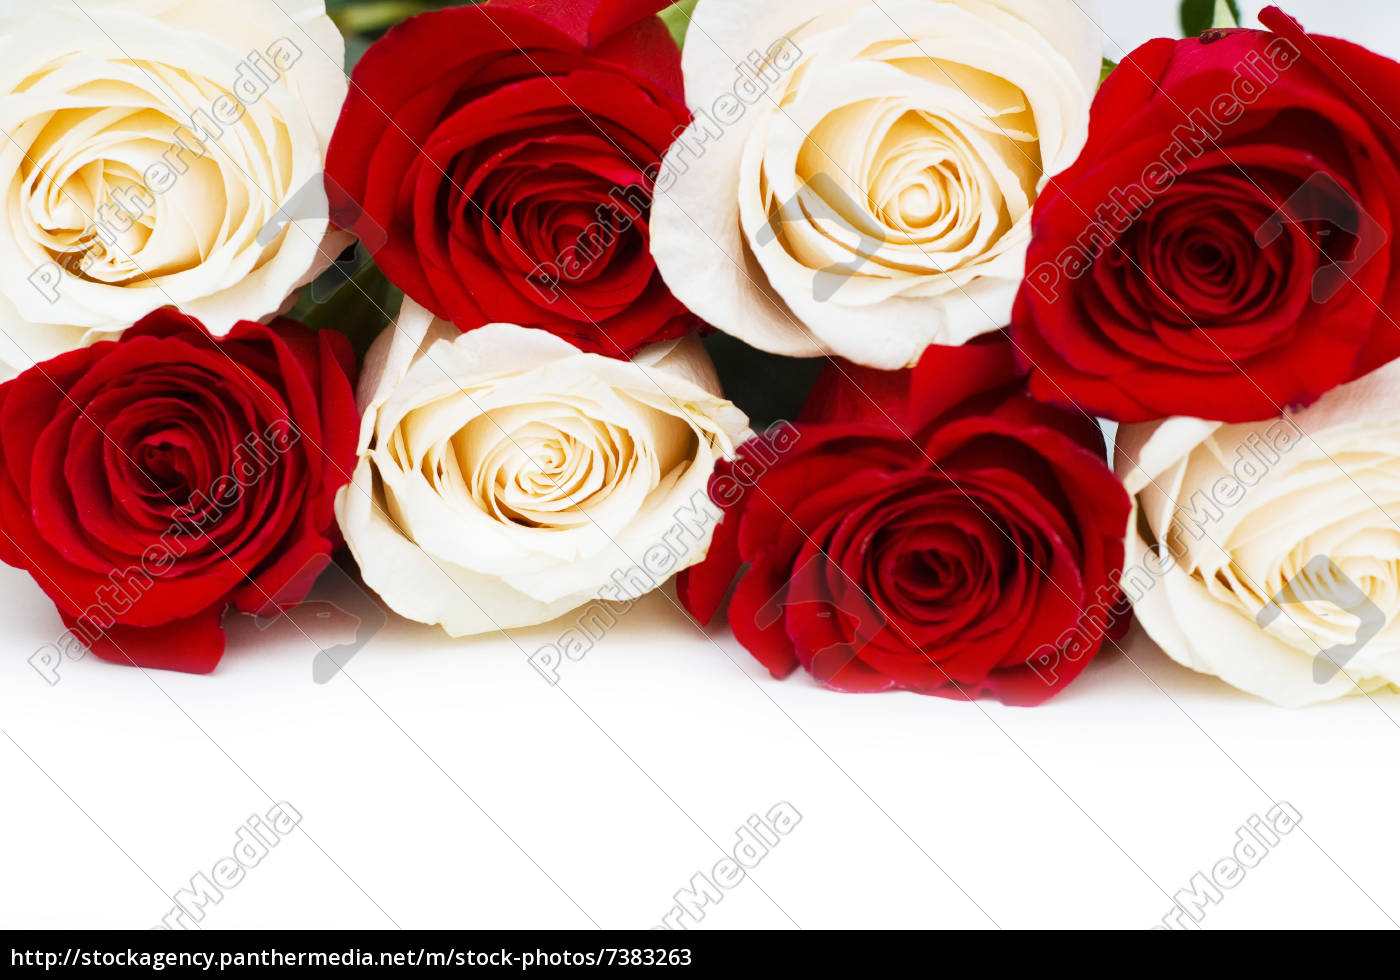 Red And White Roses Isolated On White Stock Photo 7383263